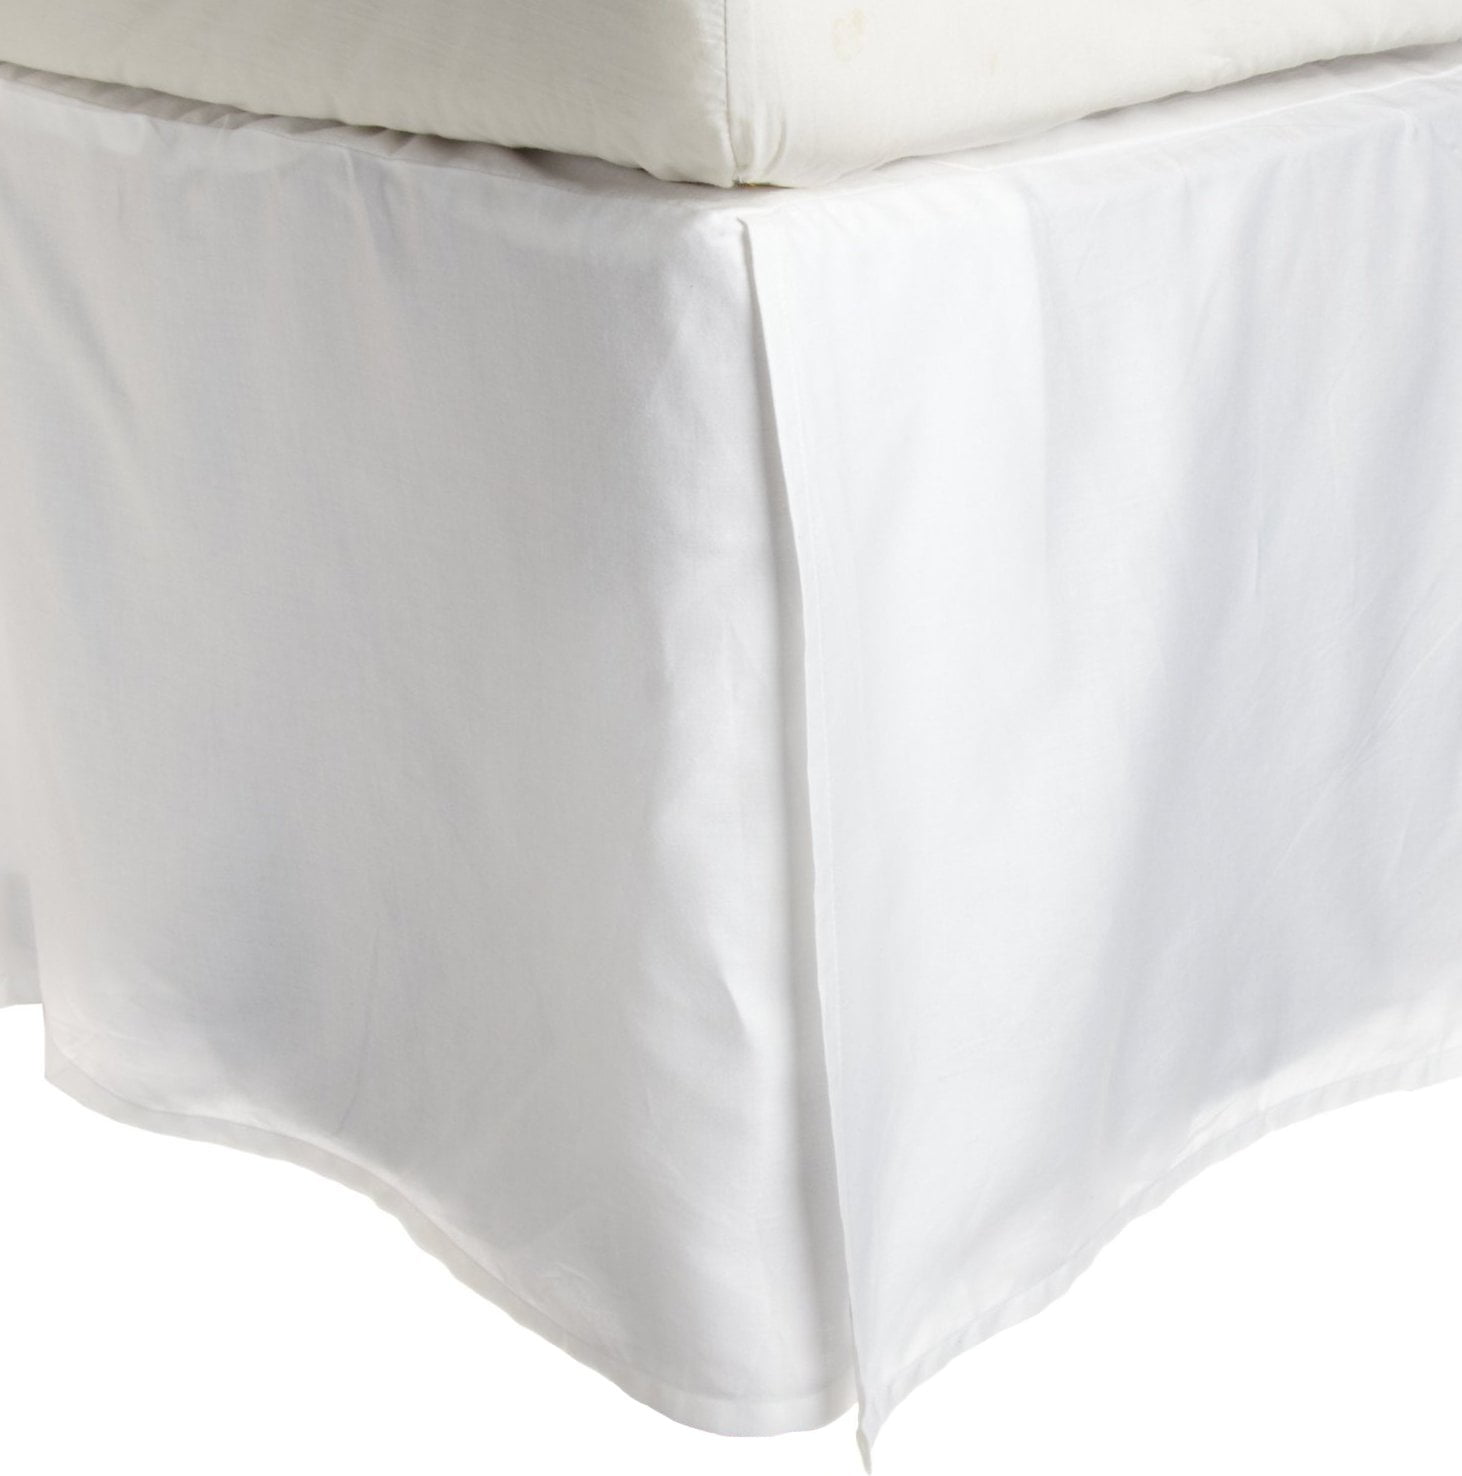 Details about   100% Egyptian Cotton Bed Skirt Ruffle Split Corner 400 Tc Queen/King/Full Size 